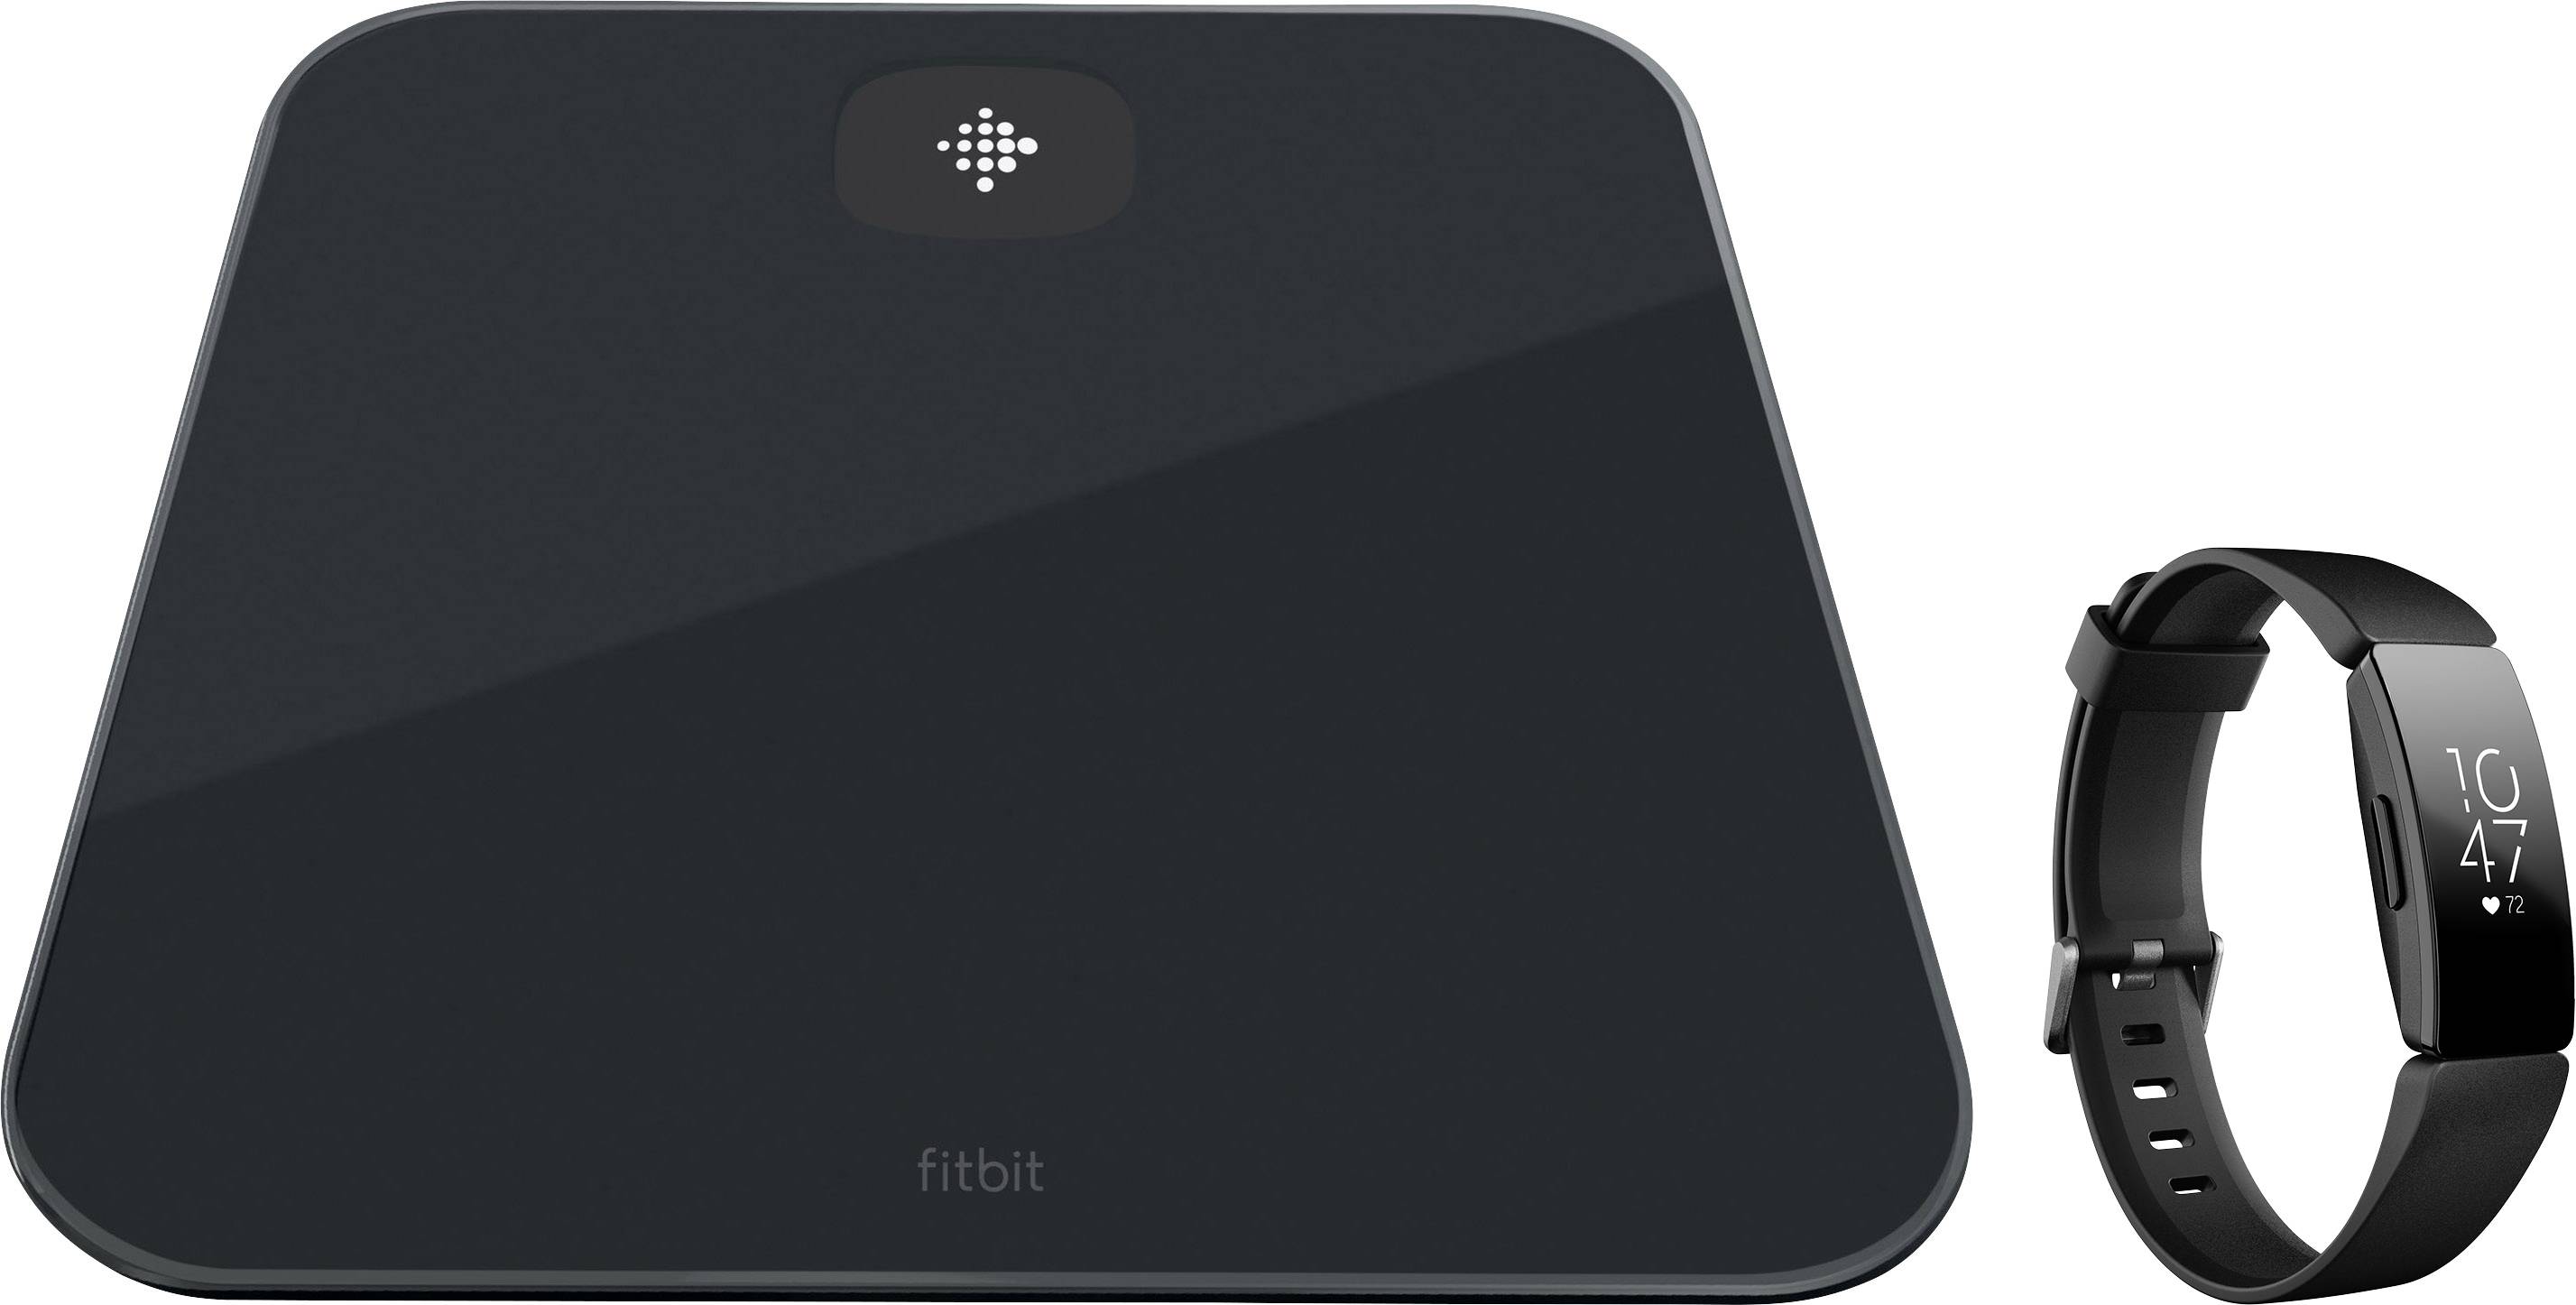 FitBit Aria Air Analytical scales 